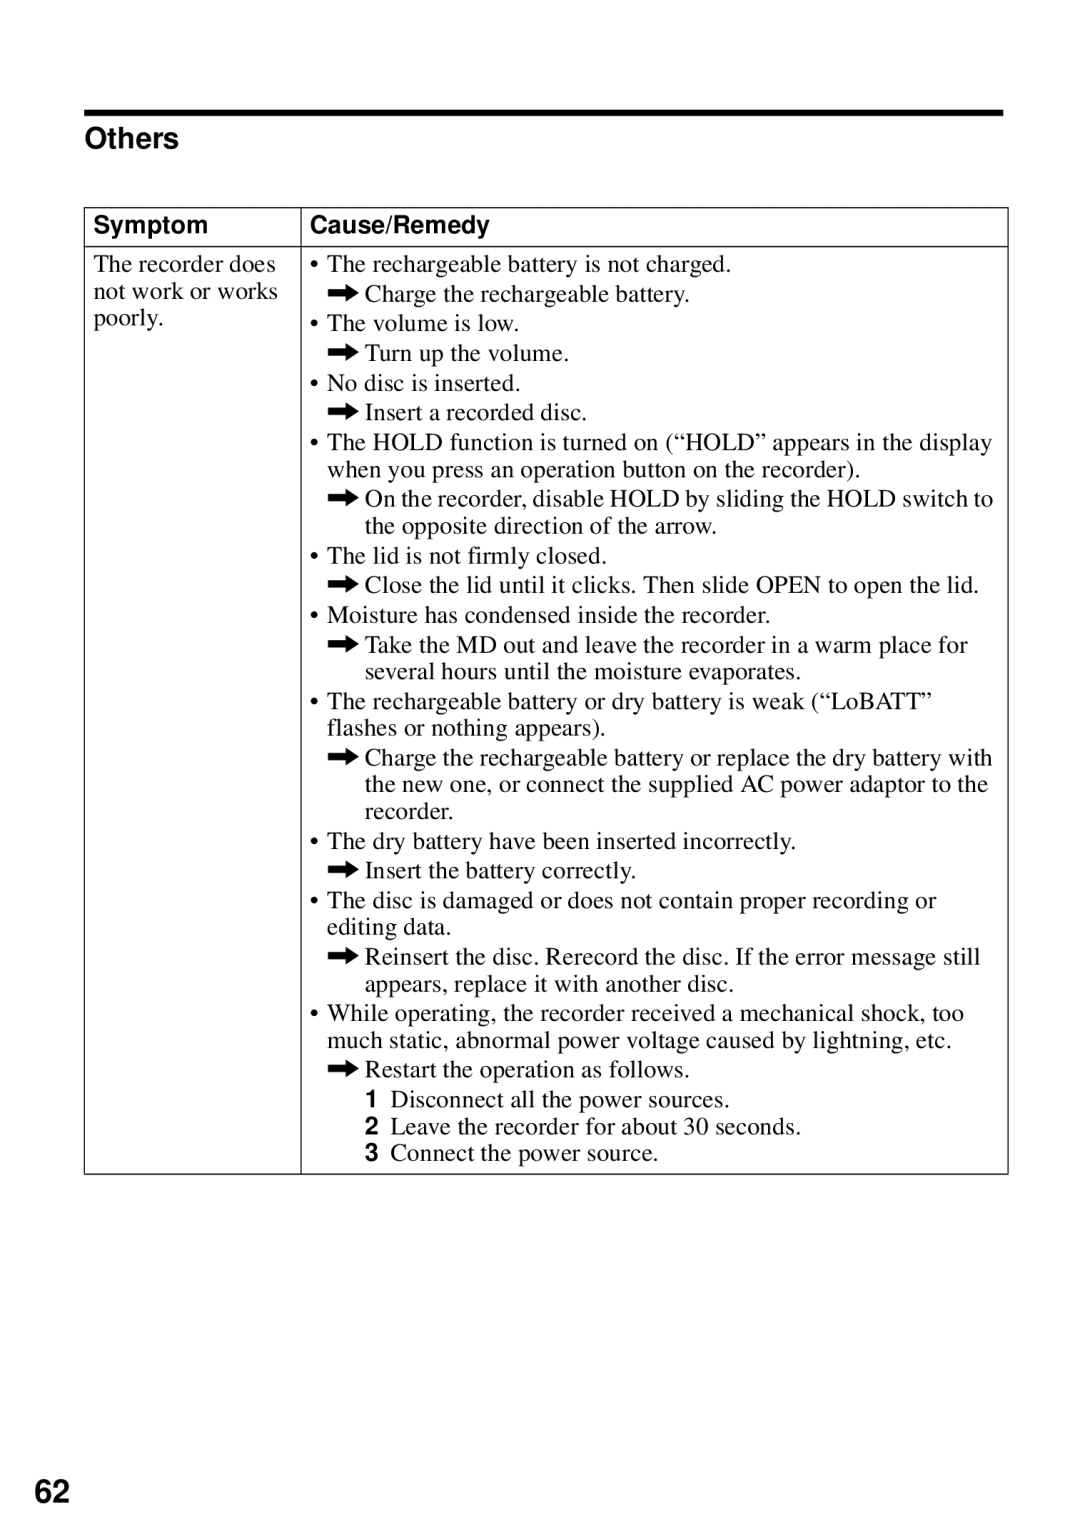 Sony MZ-N510 operating instructions Others, Symptom, Cause/Remedy 